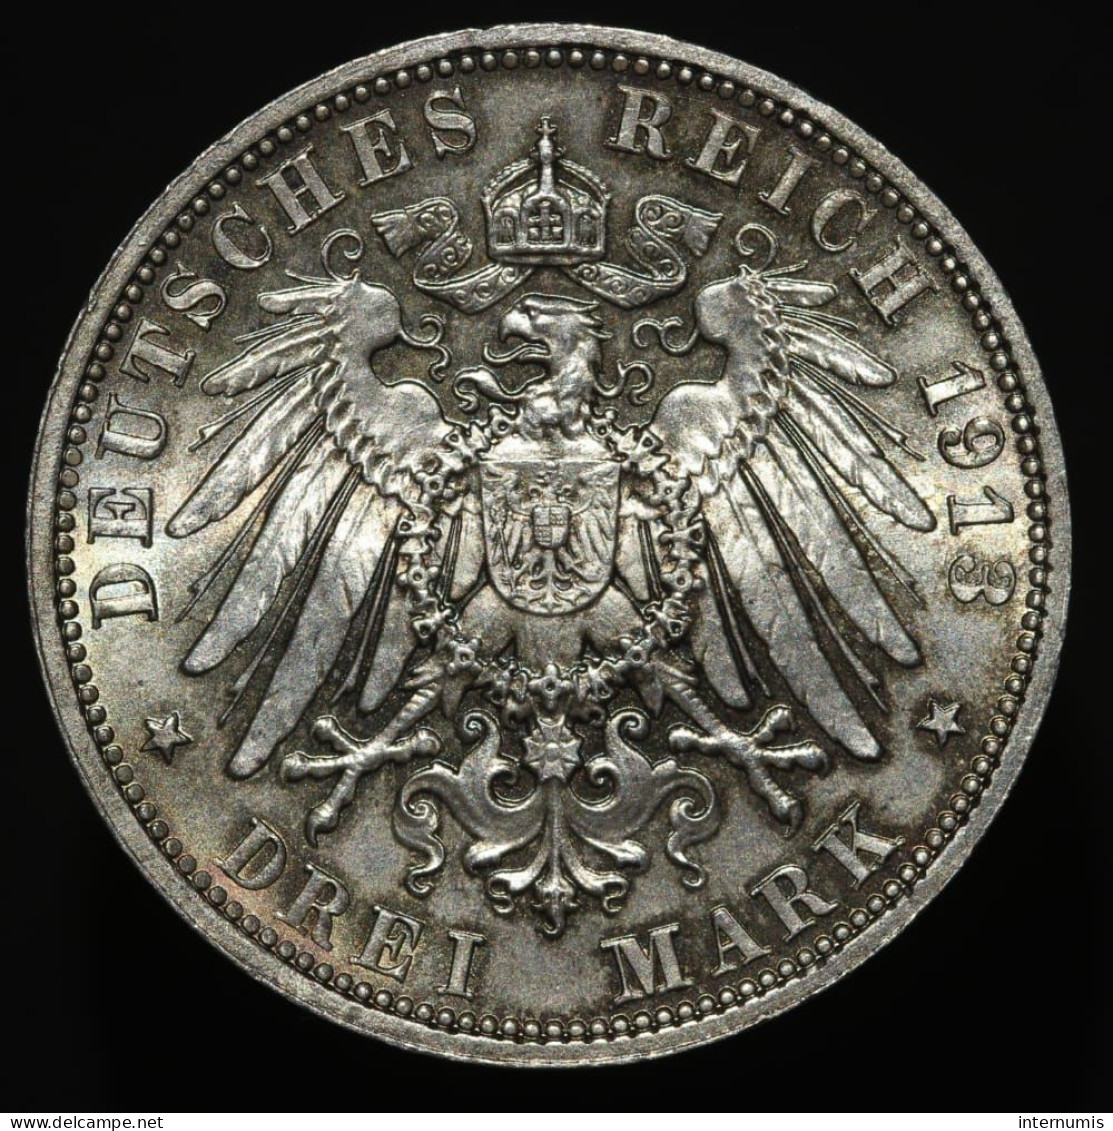 Allemagne / Germany, Friedrich August III, 3 Mark, 1913-E, Argent (Silver), NC (UNC), KM#1275, J#140 - 2, 3 & 5 Mark Argent